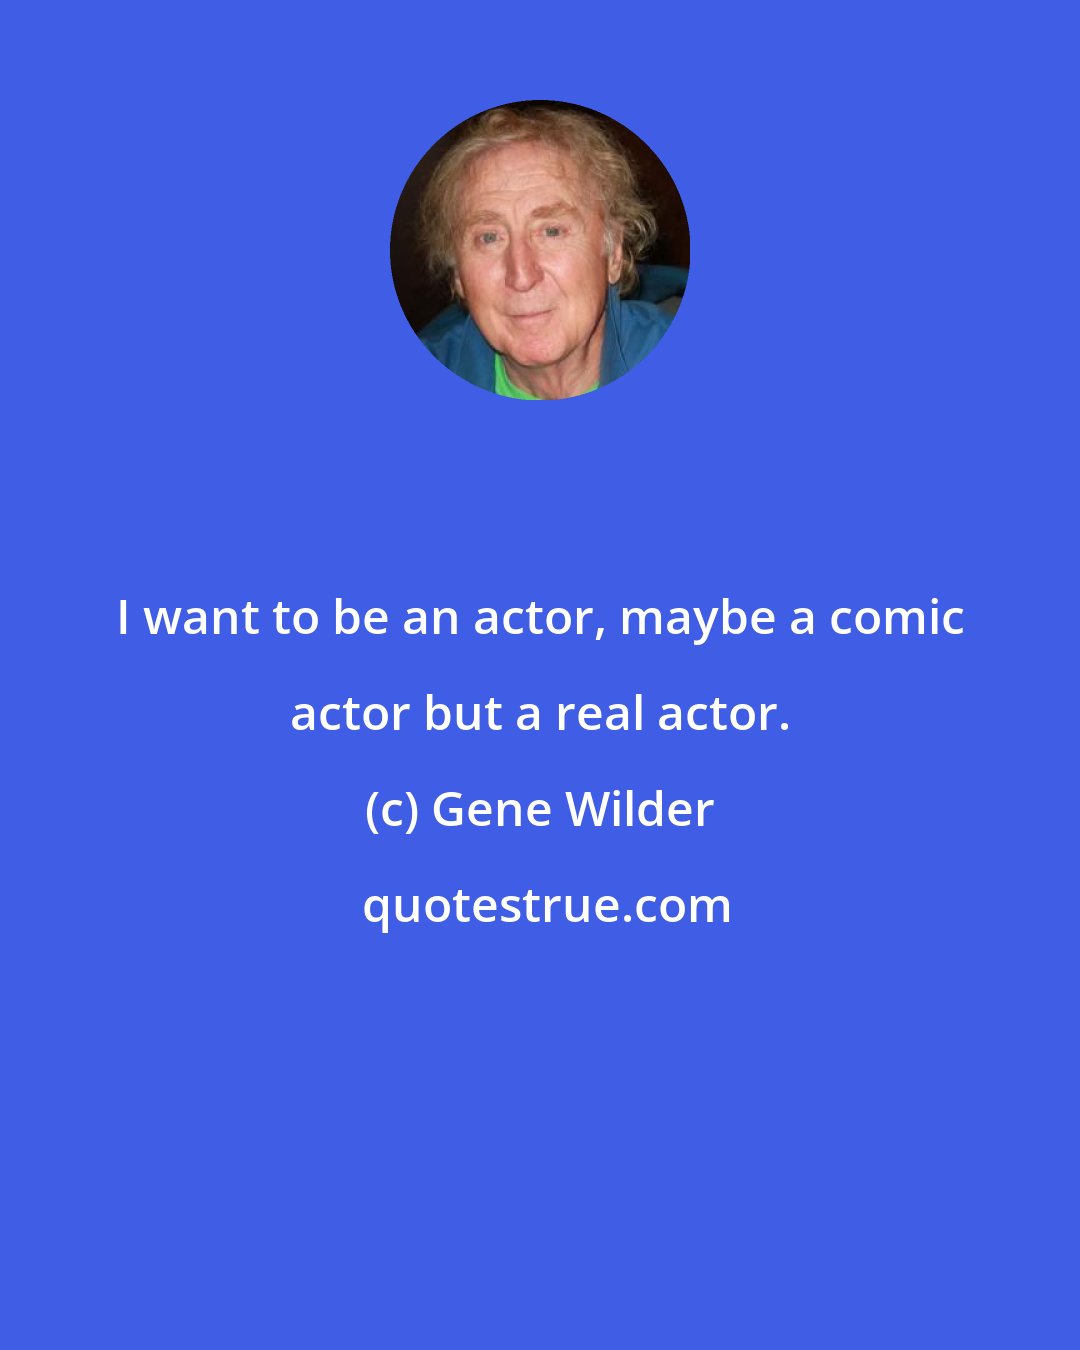 Gene Wilder: I want to be an actor, maybe a comic actor but a real actor.